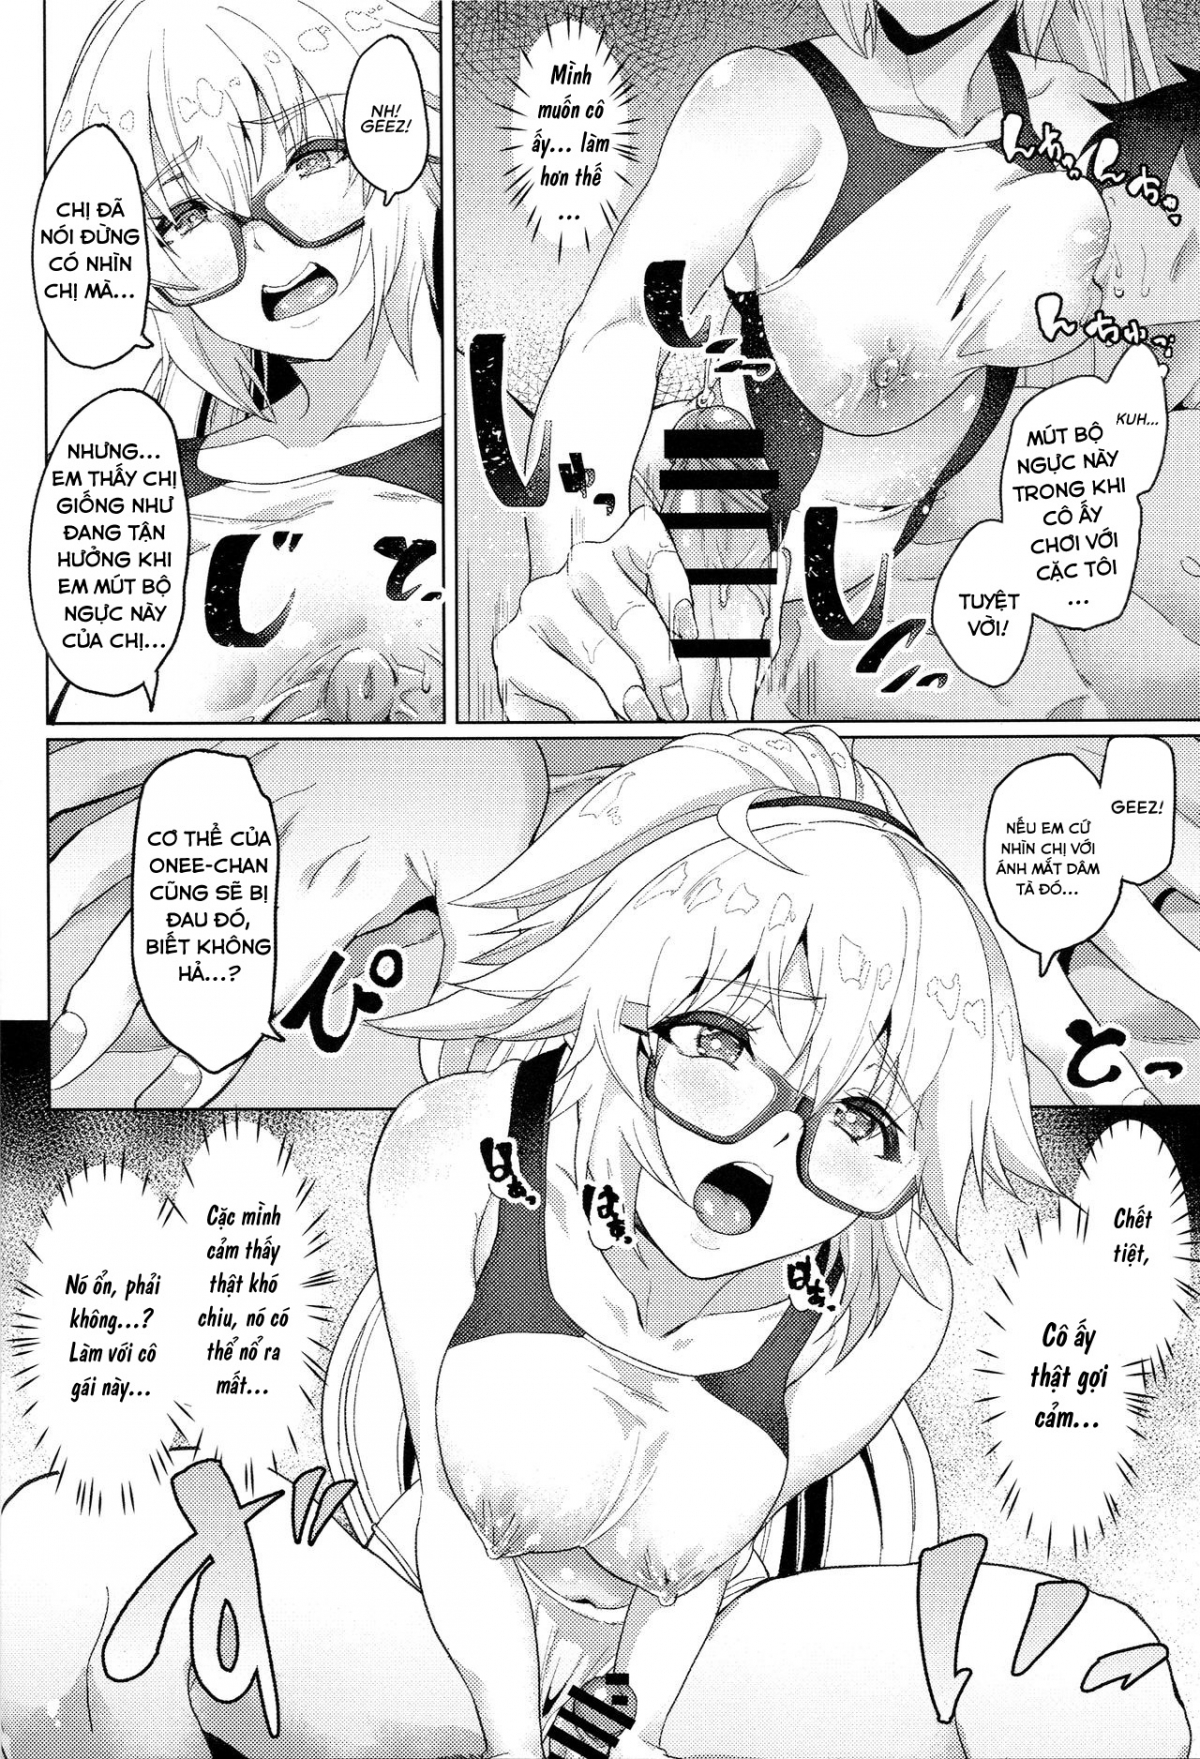 Xem ảnh Even Knowing That It's A Trap, I (An Ntr Victim) Can't Resist My Friend's Touch-Heavy Jeanne! - One Shot - 1603685695276_0 - Hentai24h.Tv